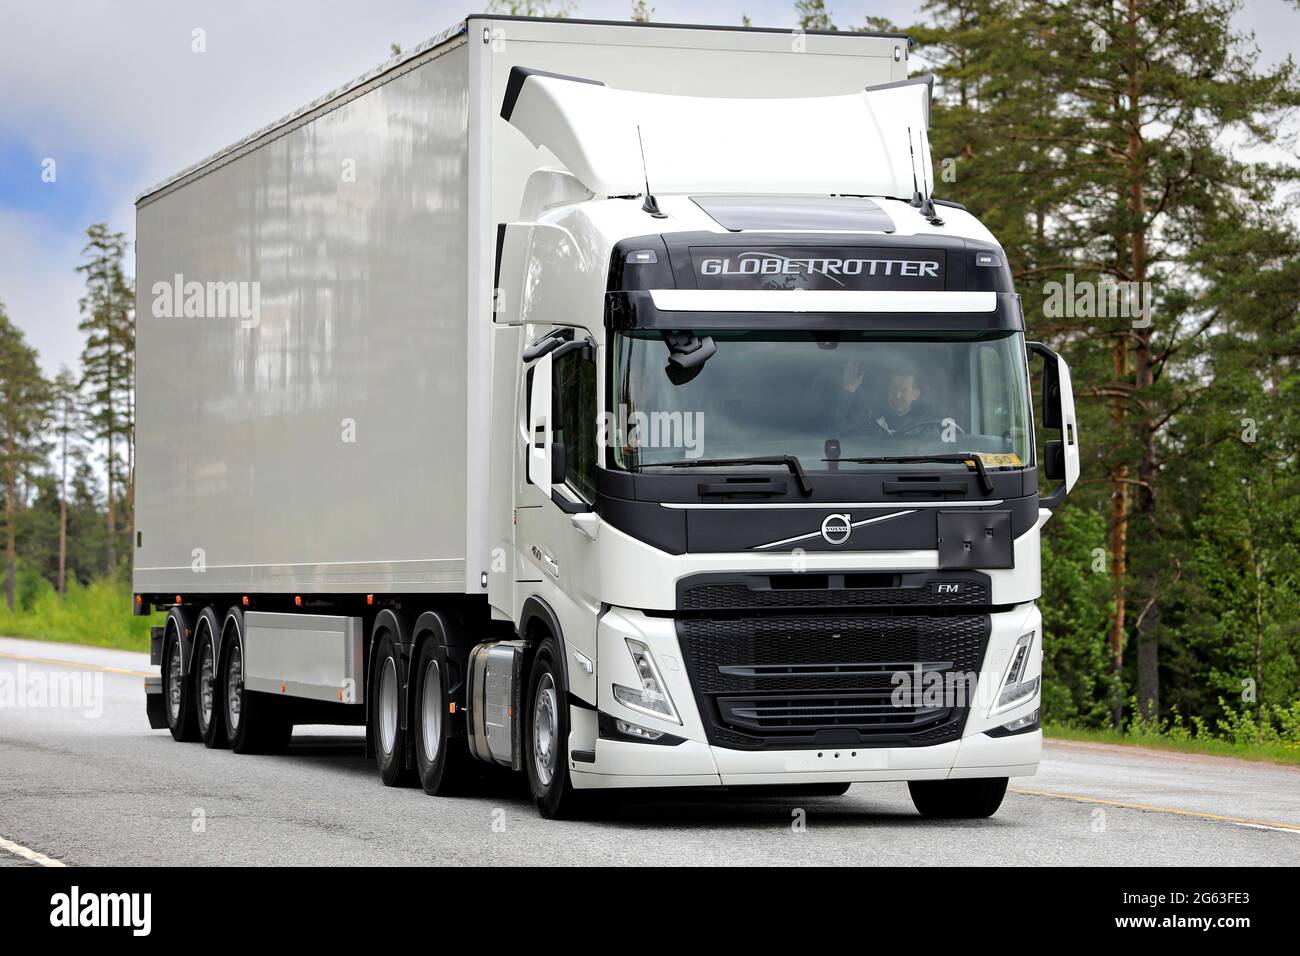 Volvo Fm High Resolution Stock Photography and Images - Alamy